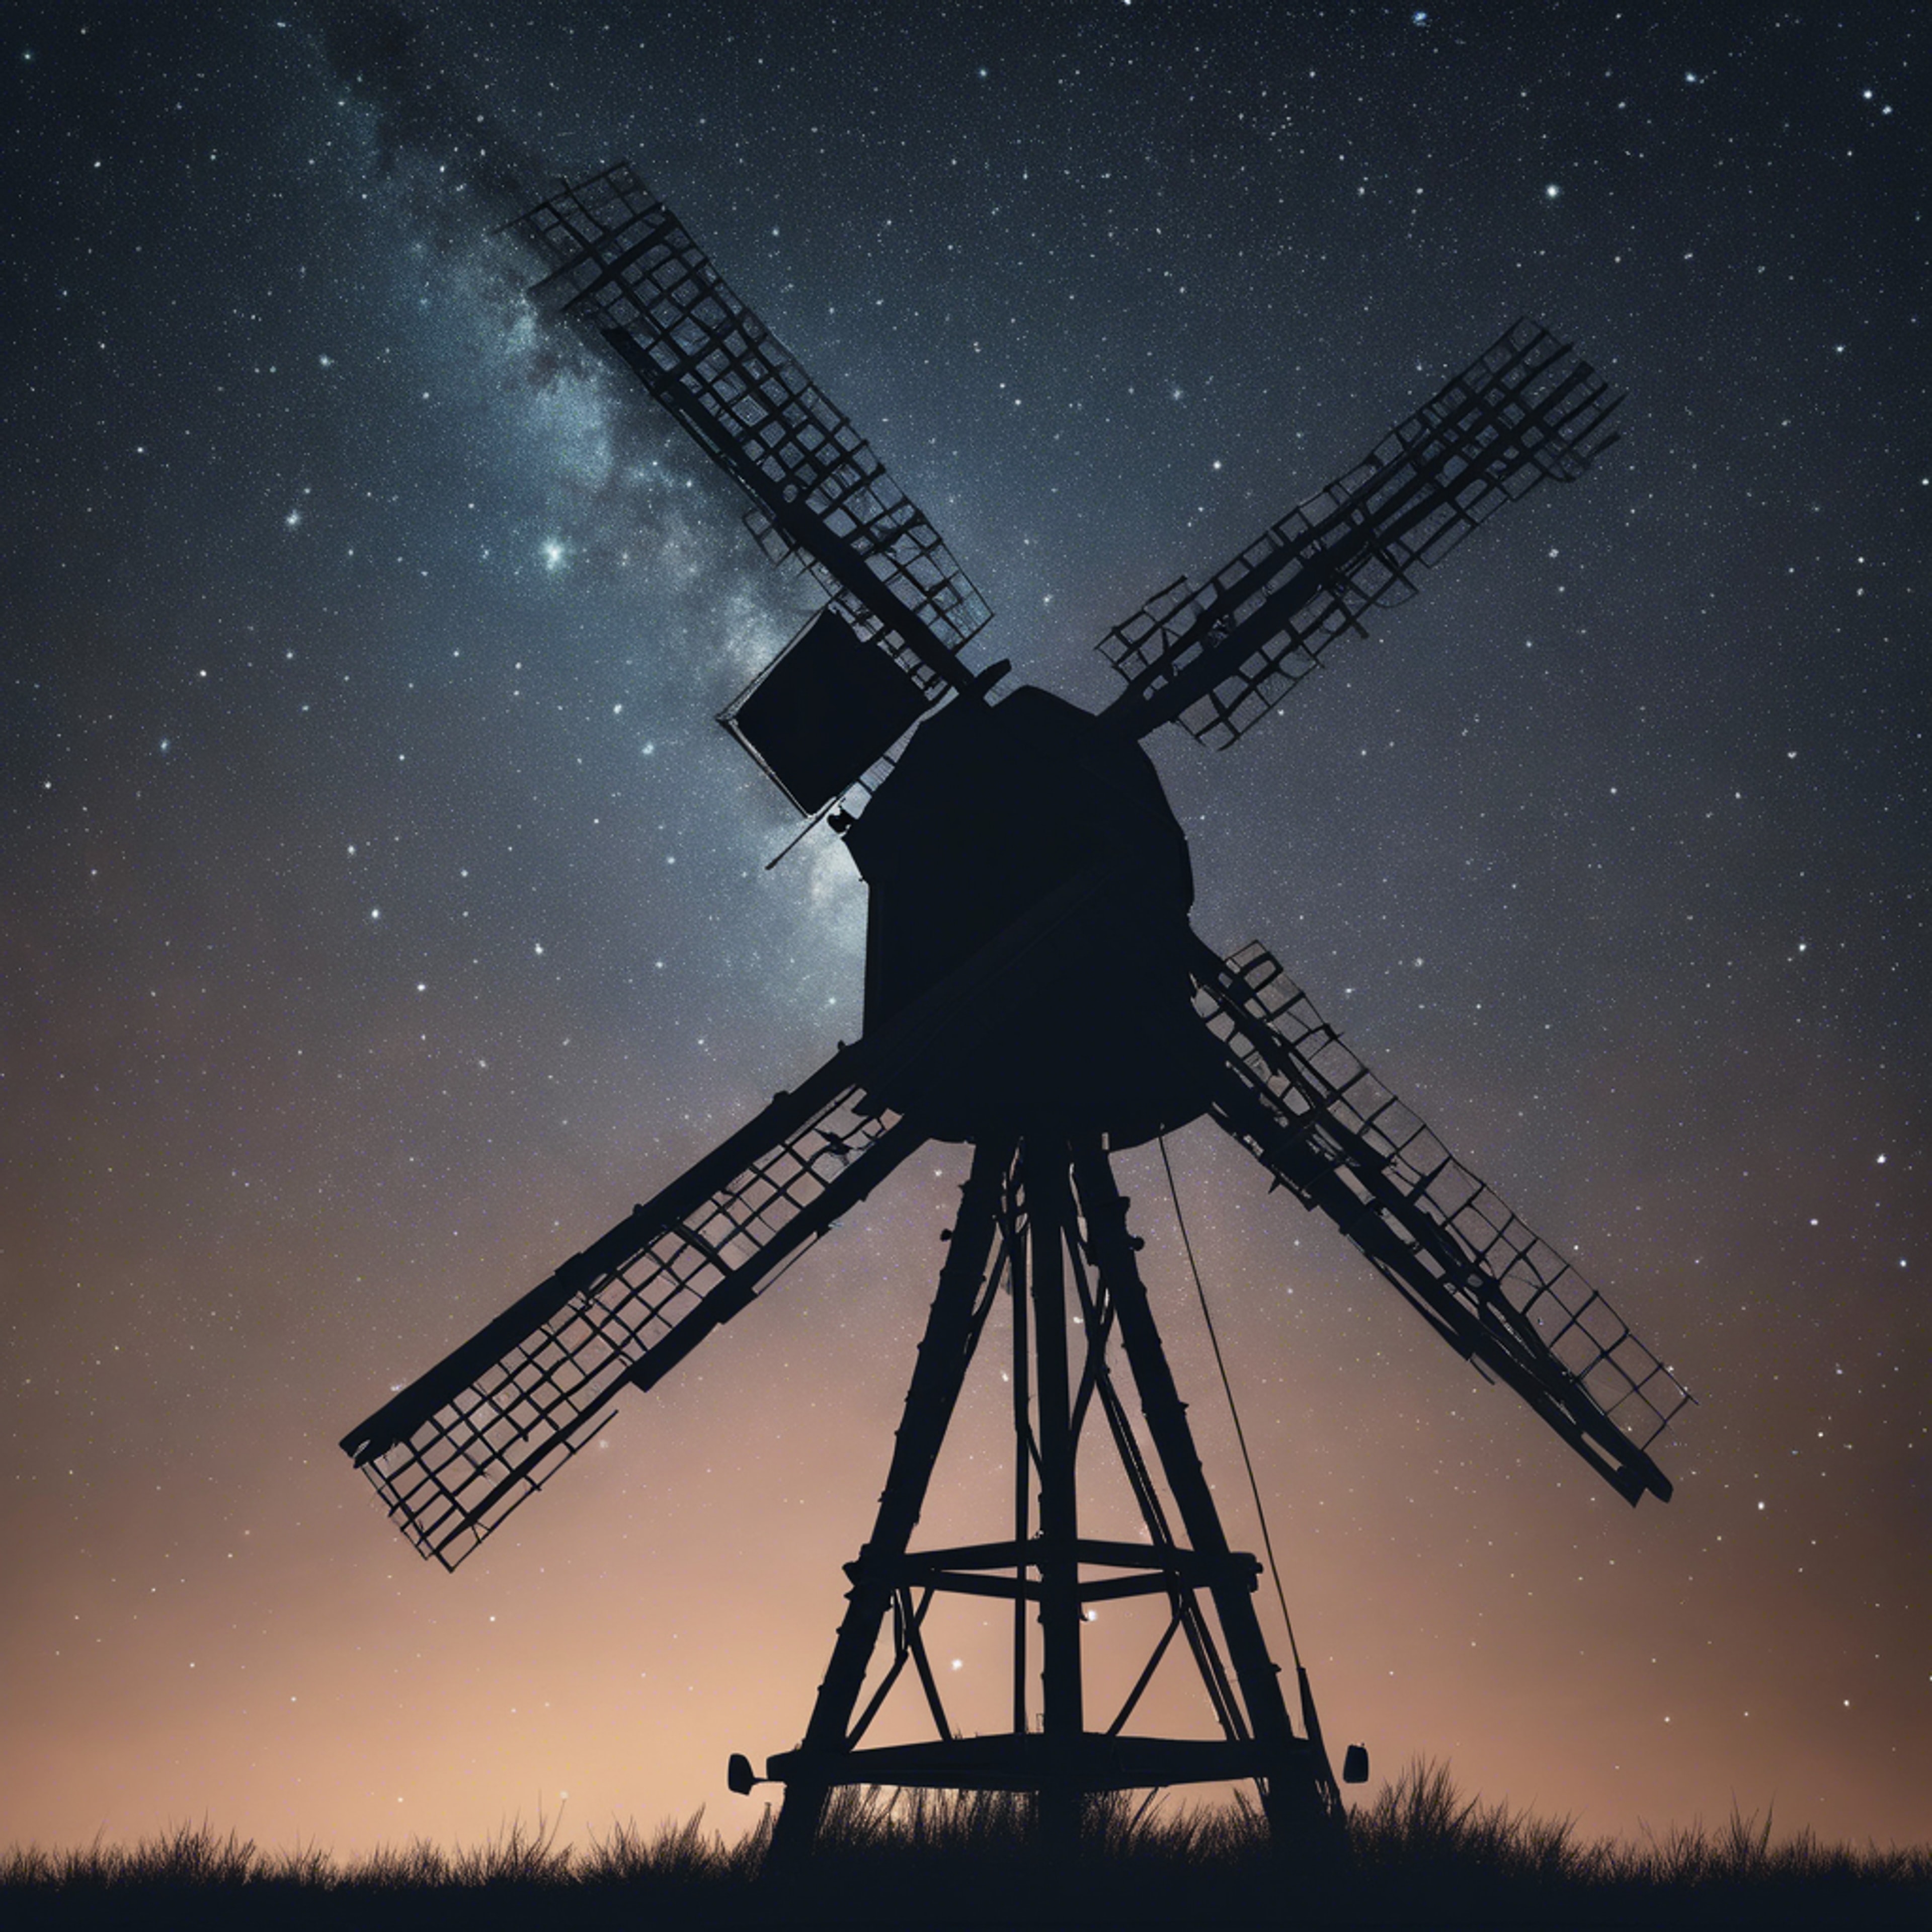 A silhouette of a traditional windmill against a mesmerizing starry night sky.壁紙[d821762278f94928b618]